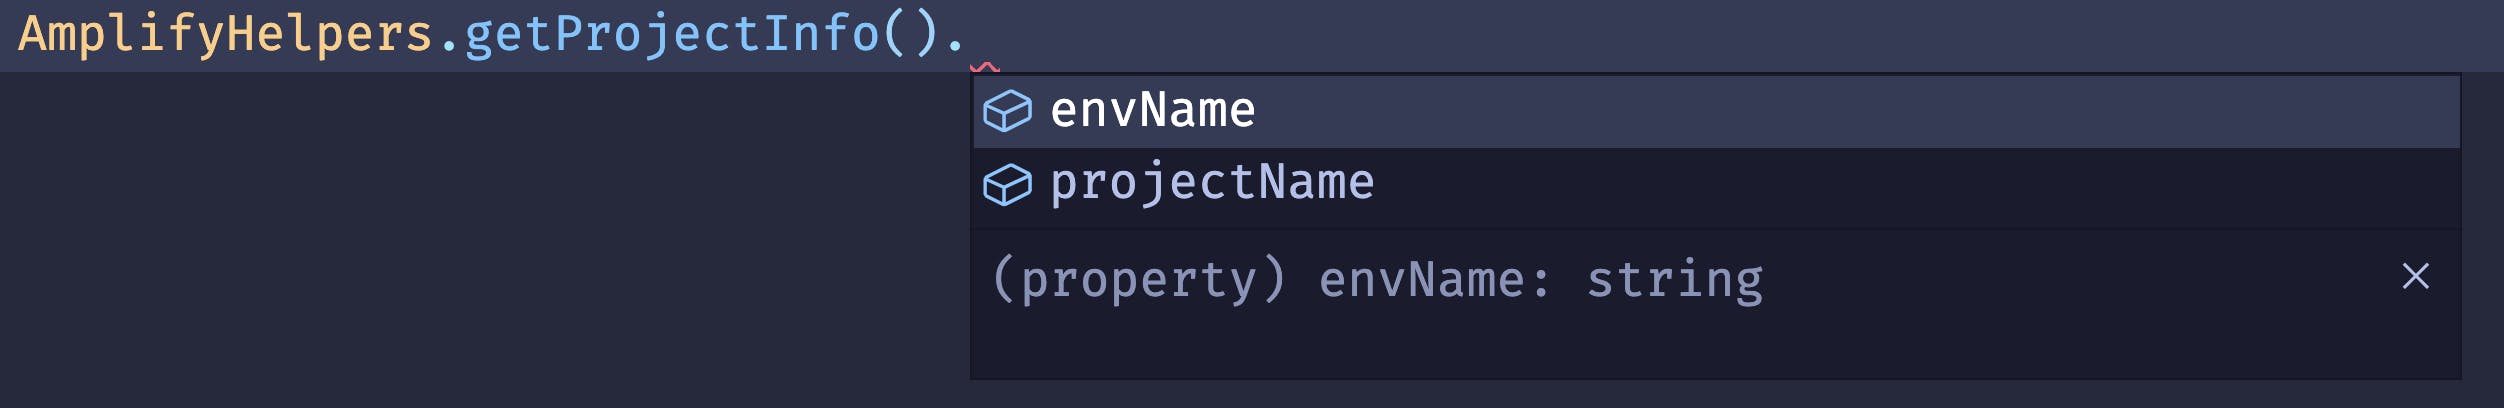 envName and projectName being show via intellisense